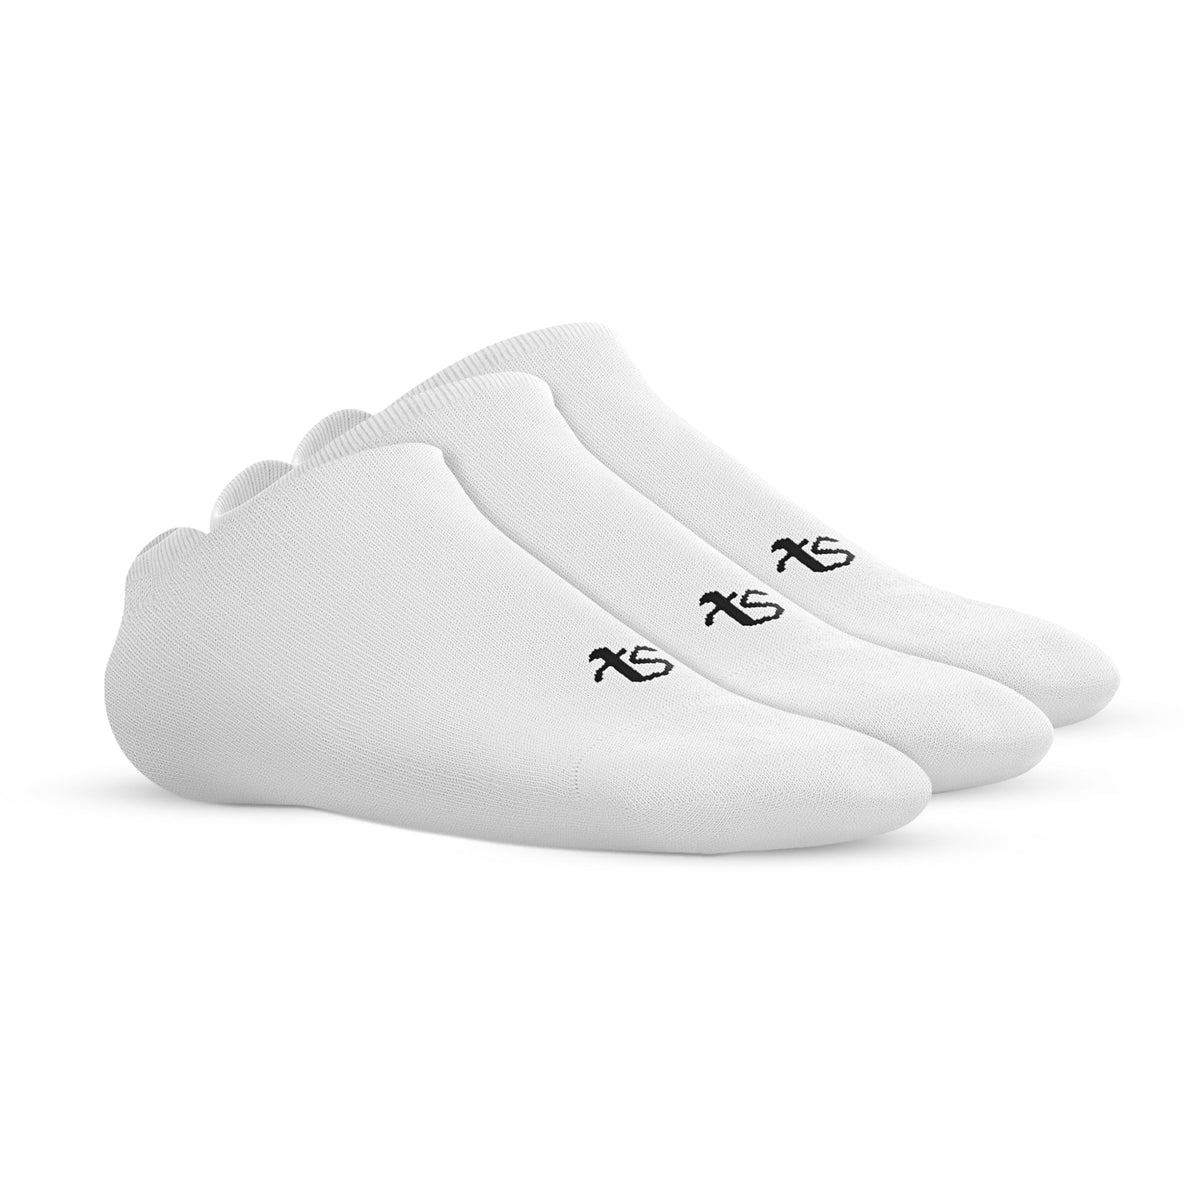 Loafer – Ever Ready – White – Set of 3